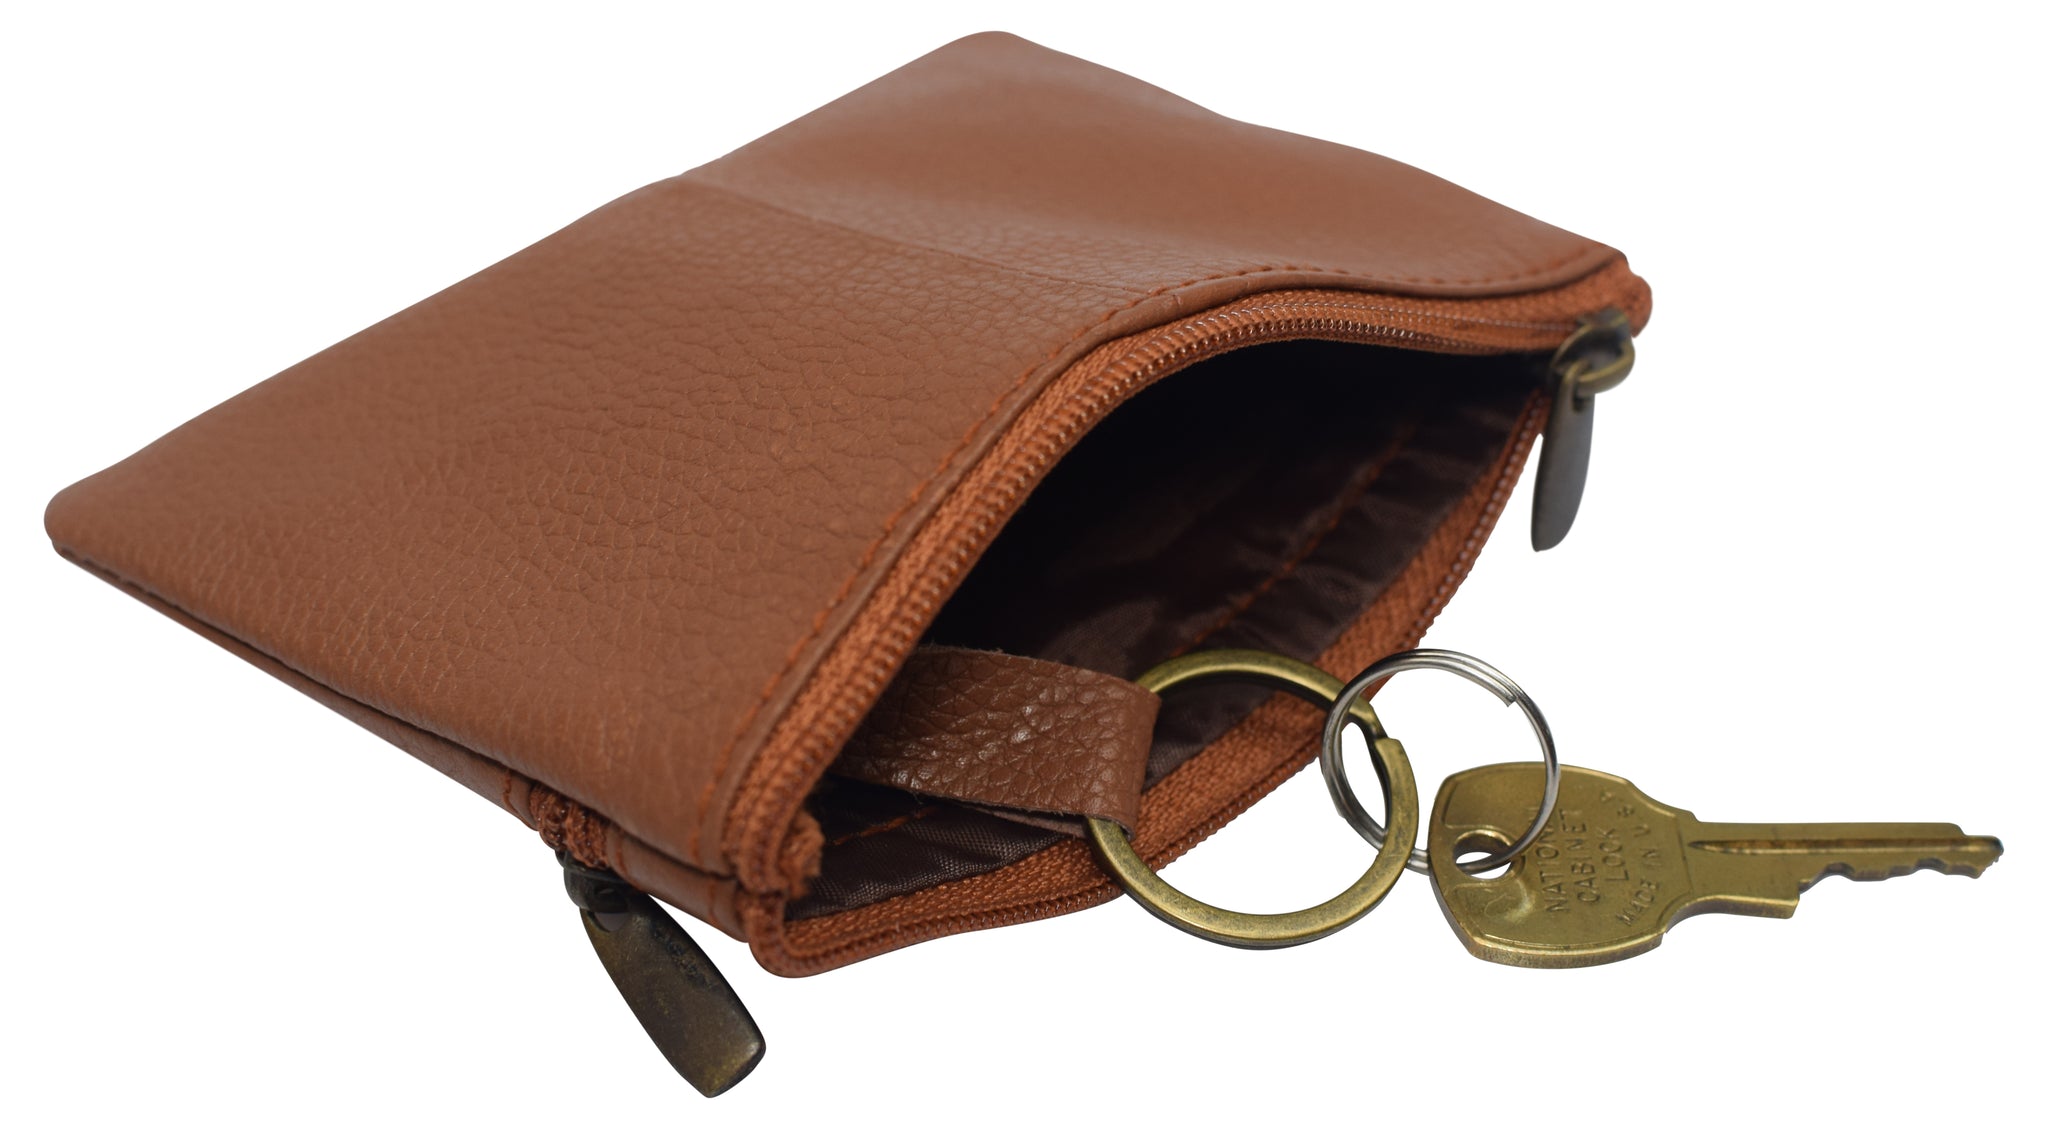  Premium Leather Key Pouch Tiny Zip Coin Purse Card Holder with  Keychain Clasp for Men Women Travel Small Top Zip Coin Pouch with ID Holder  (brown) : Clothing, Shoes & Jewelry